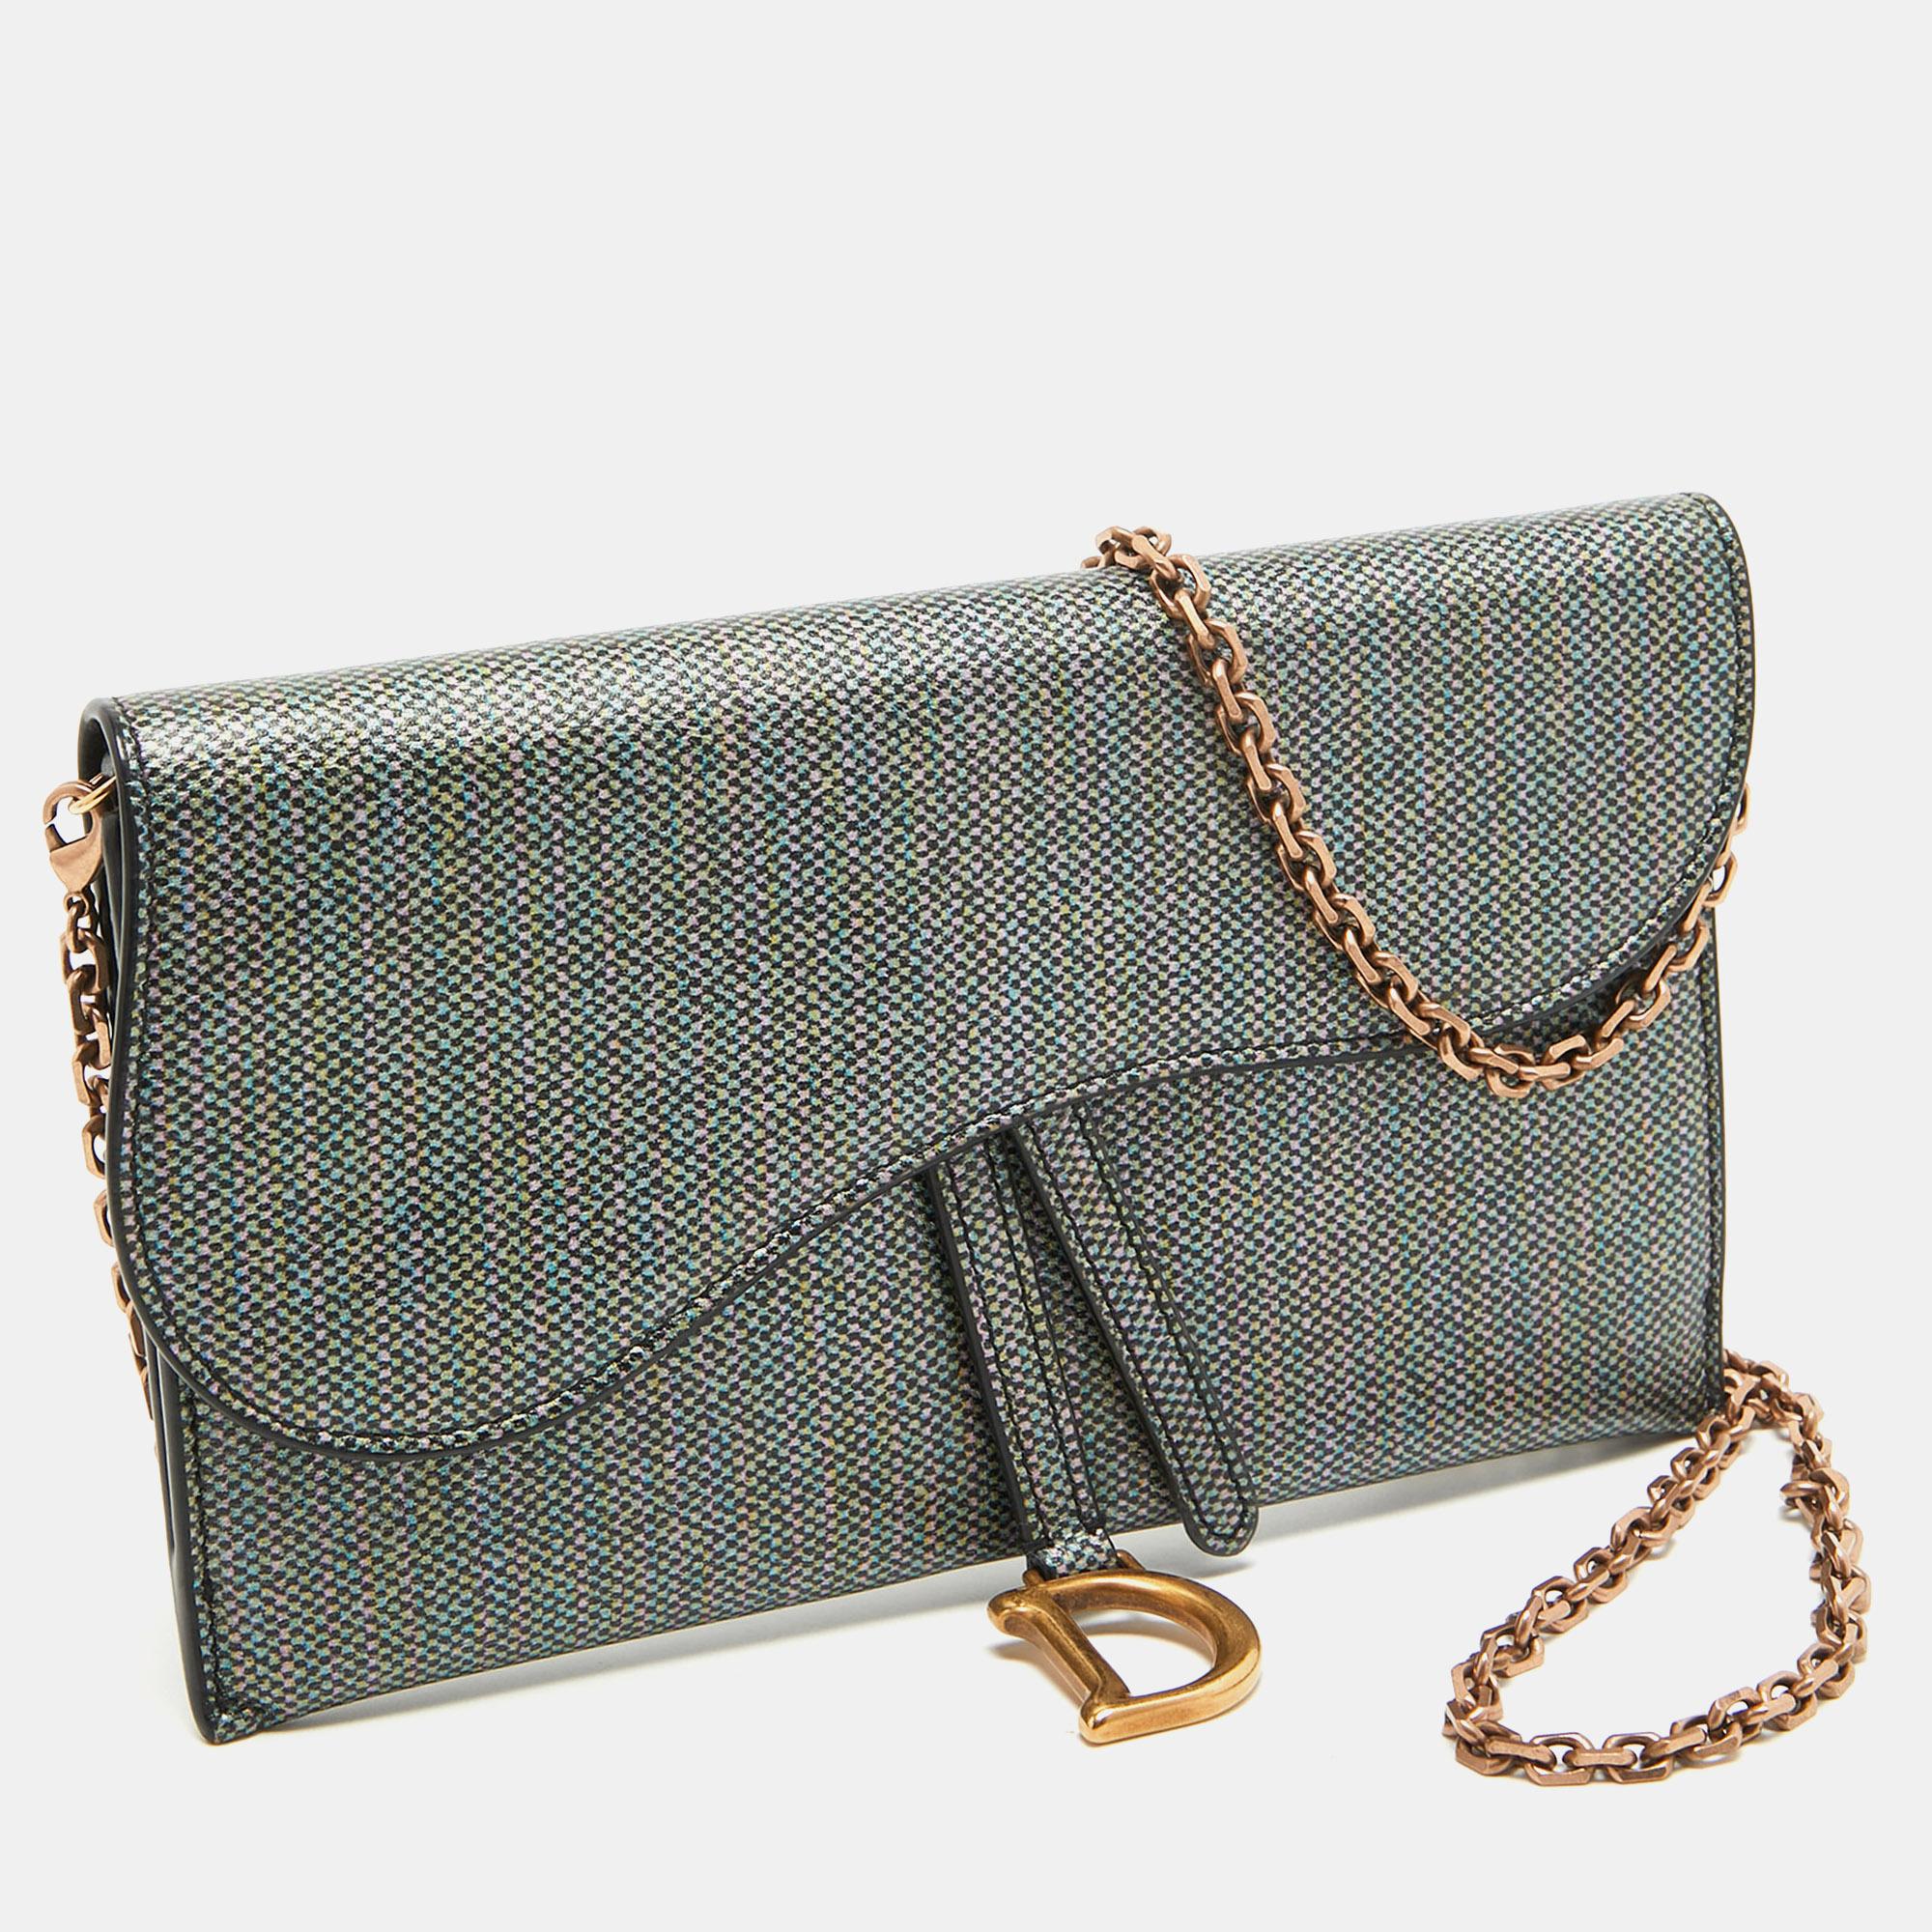 This Saddle wallet on chain from the House of Dior brings you endless functionality, style, and luxury! It is made from multicolor printed leather, with a rose gold-tone D charm perched on the front. It accommodates a leather-lined interior and a